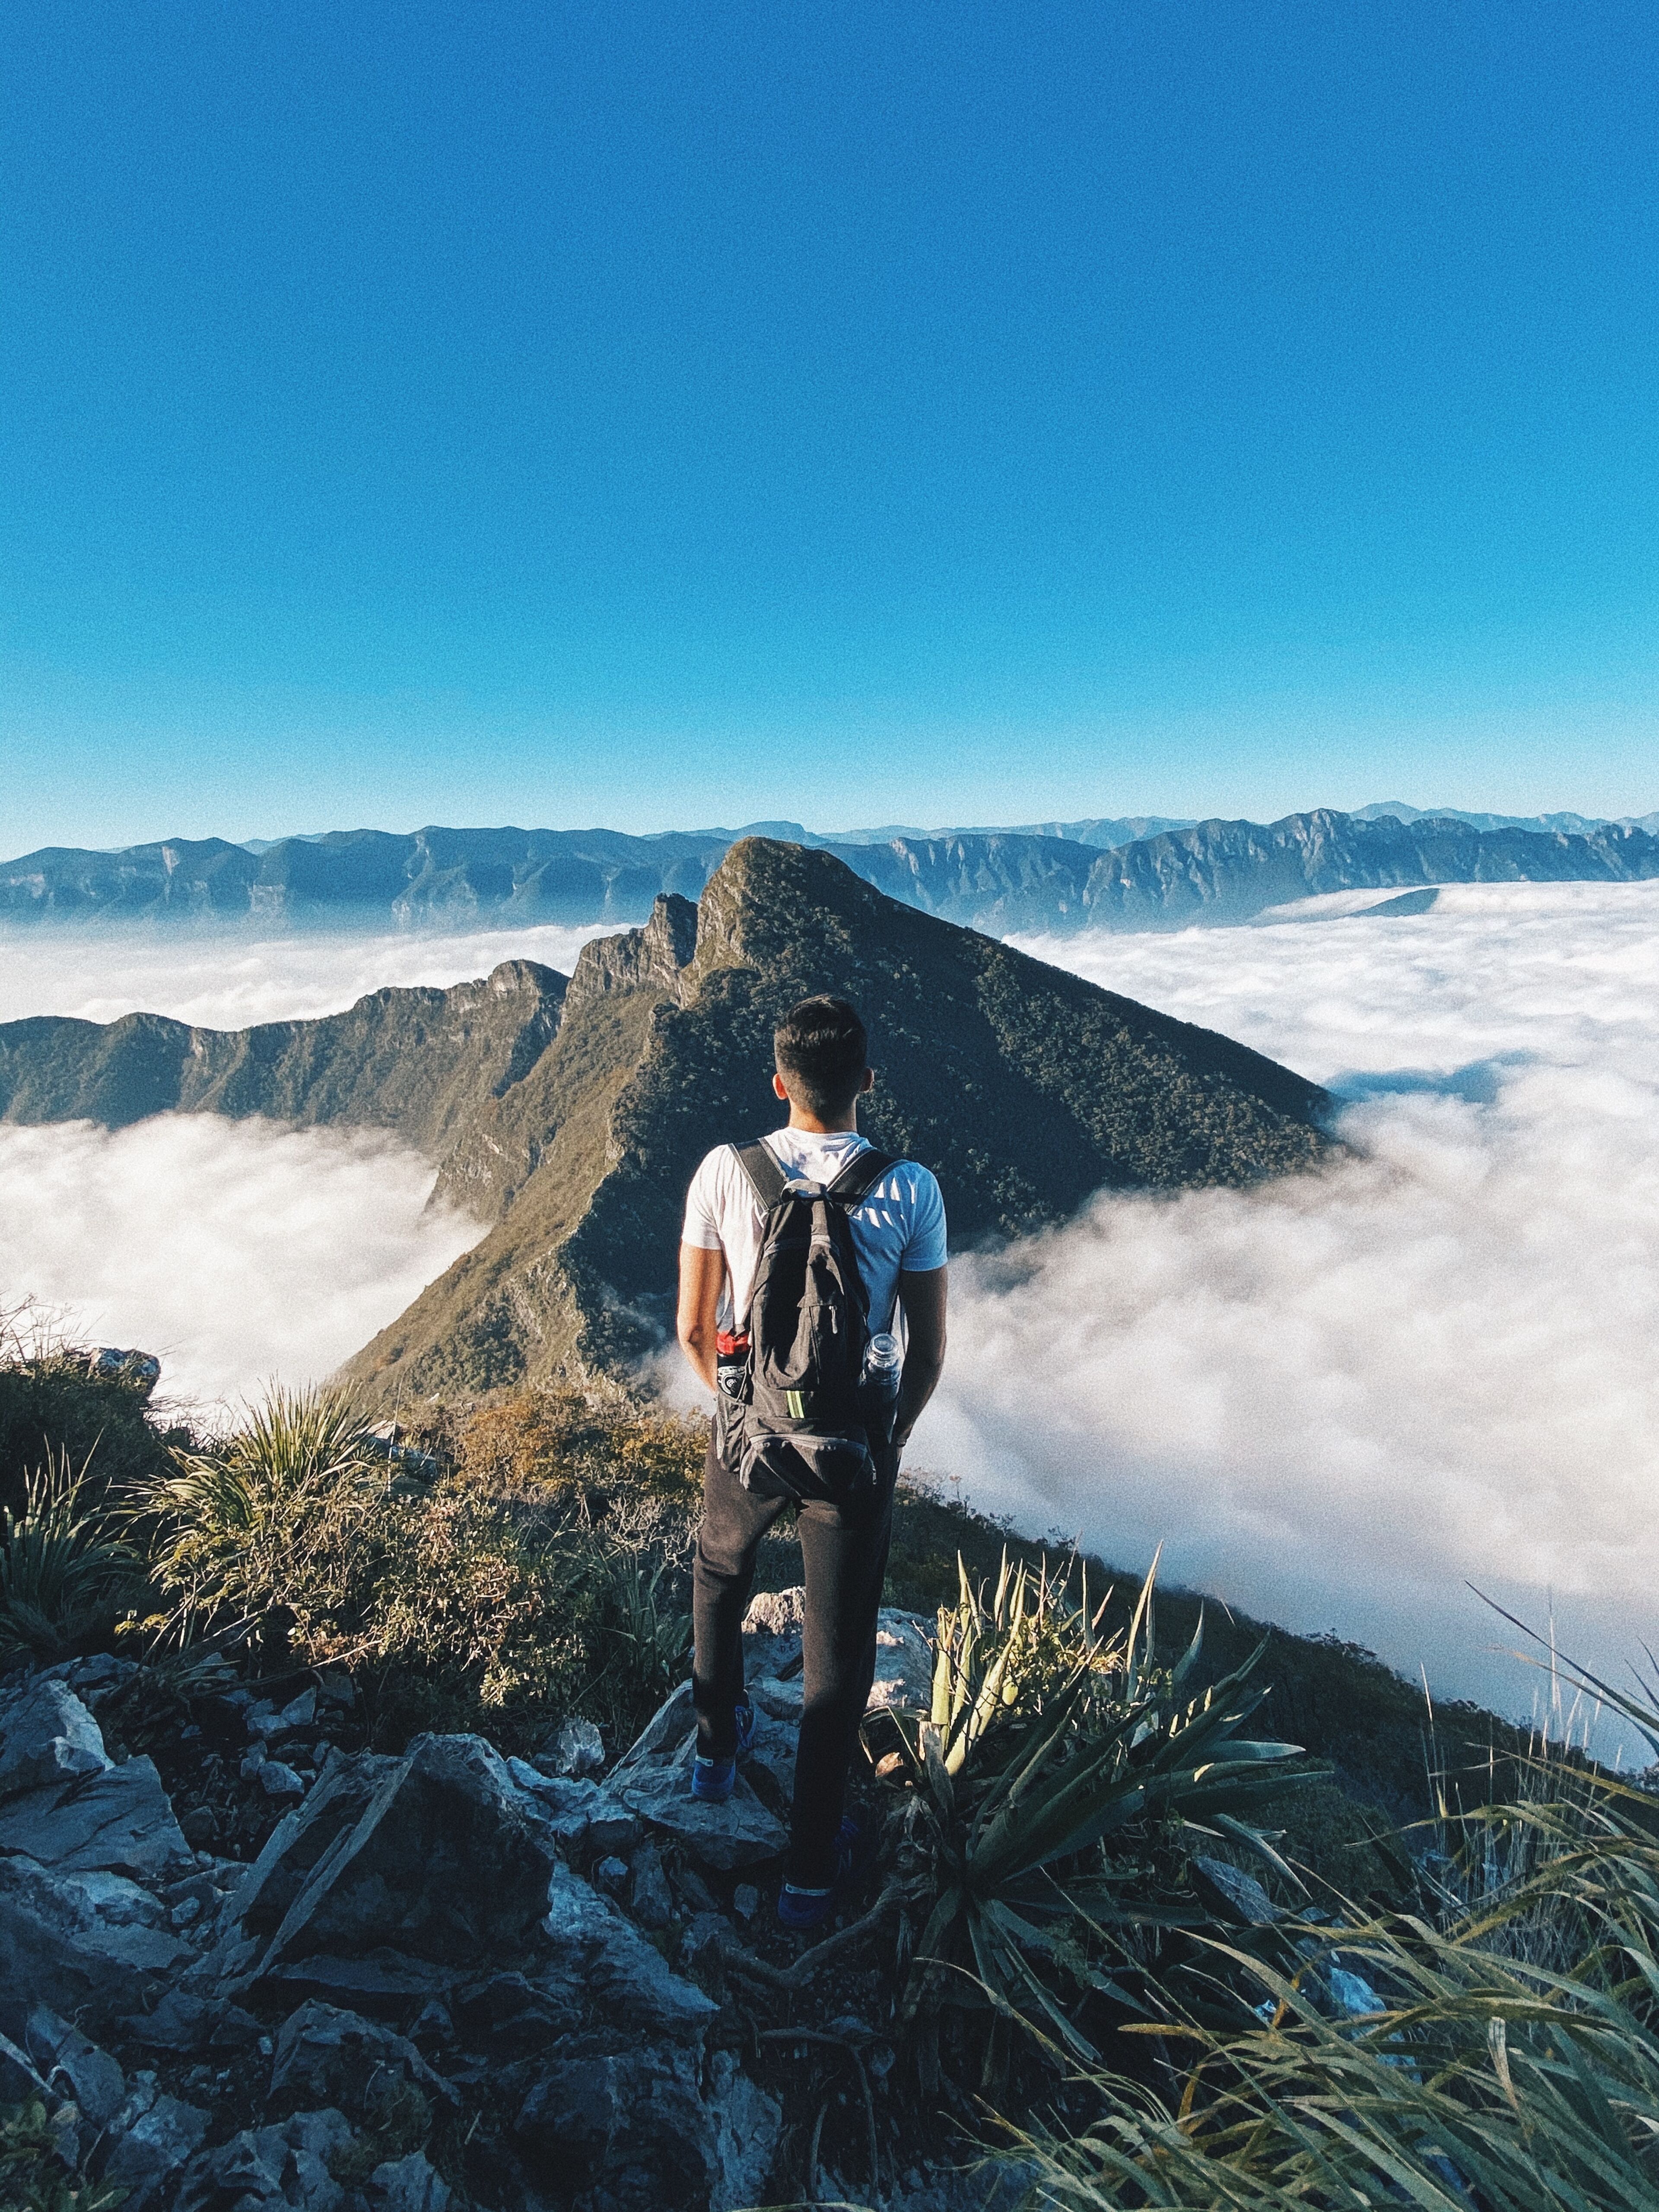  A lone hiker stands atop a rugged peak, gazing out over a sea of clouds enveloping distant mountains under a clear blue sky.